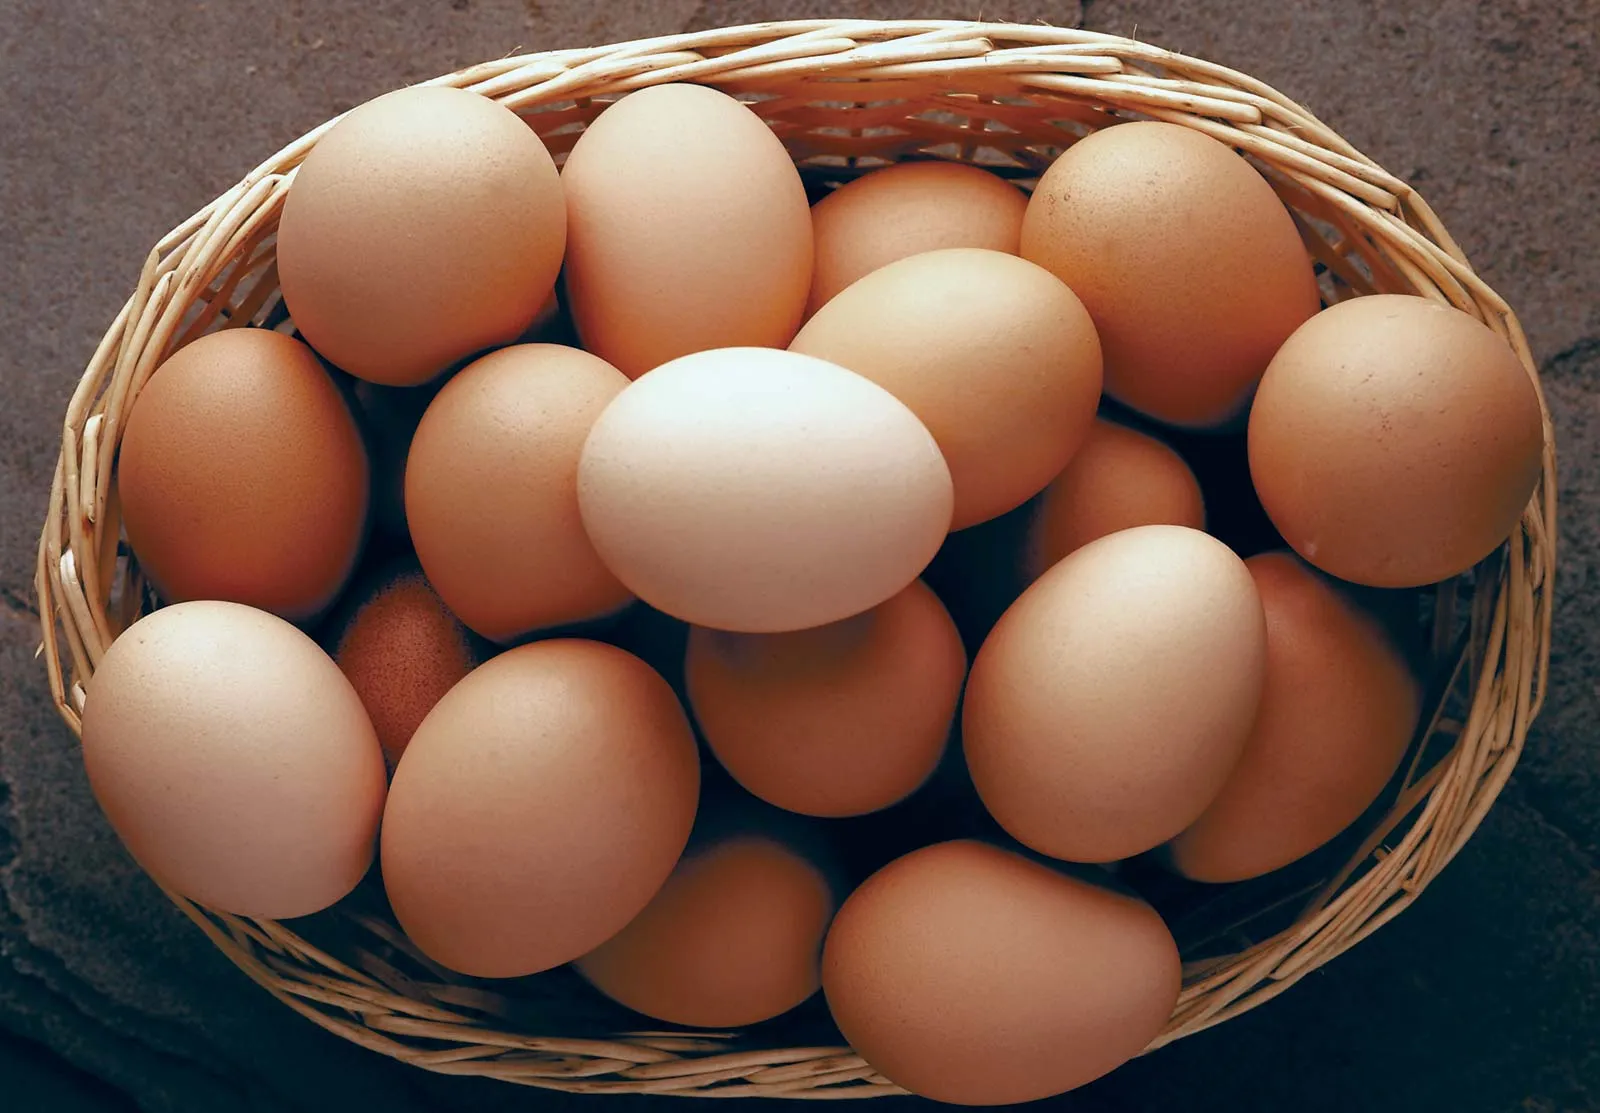 Is Chicken Egg Business Profitable in the Philippines?